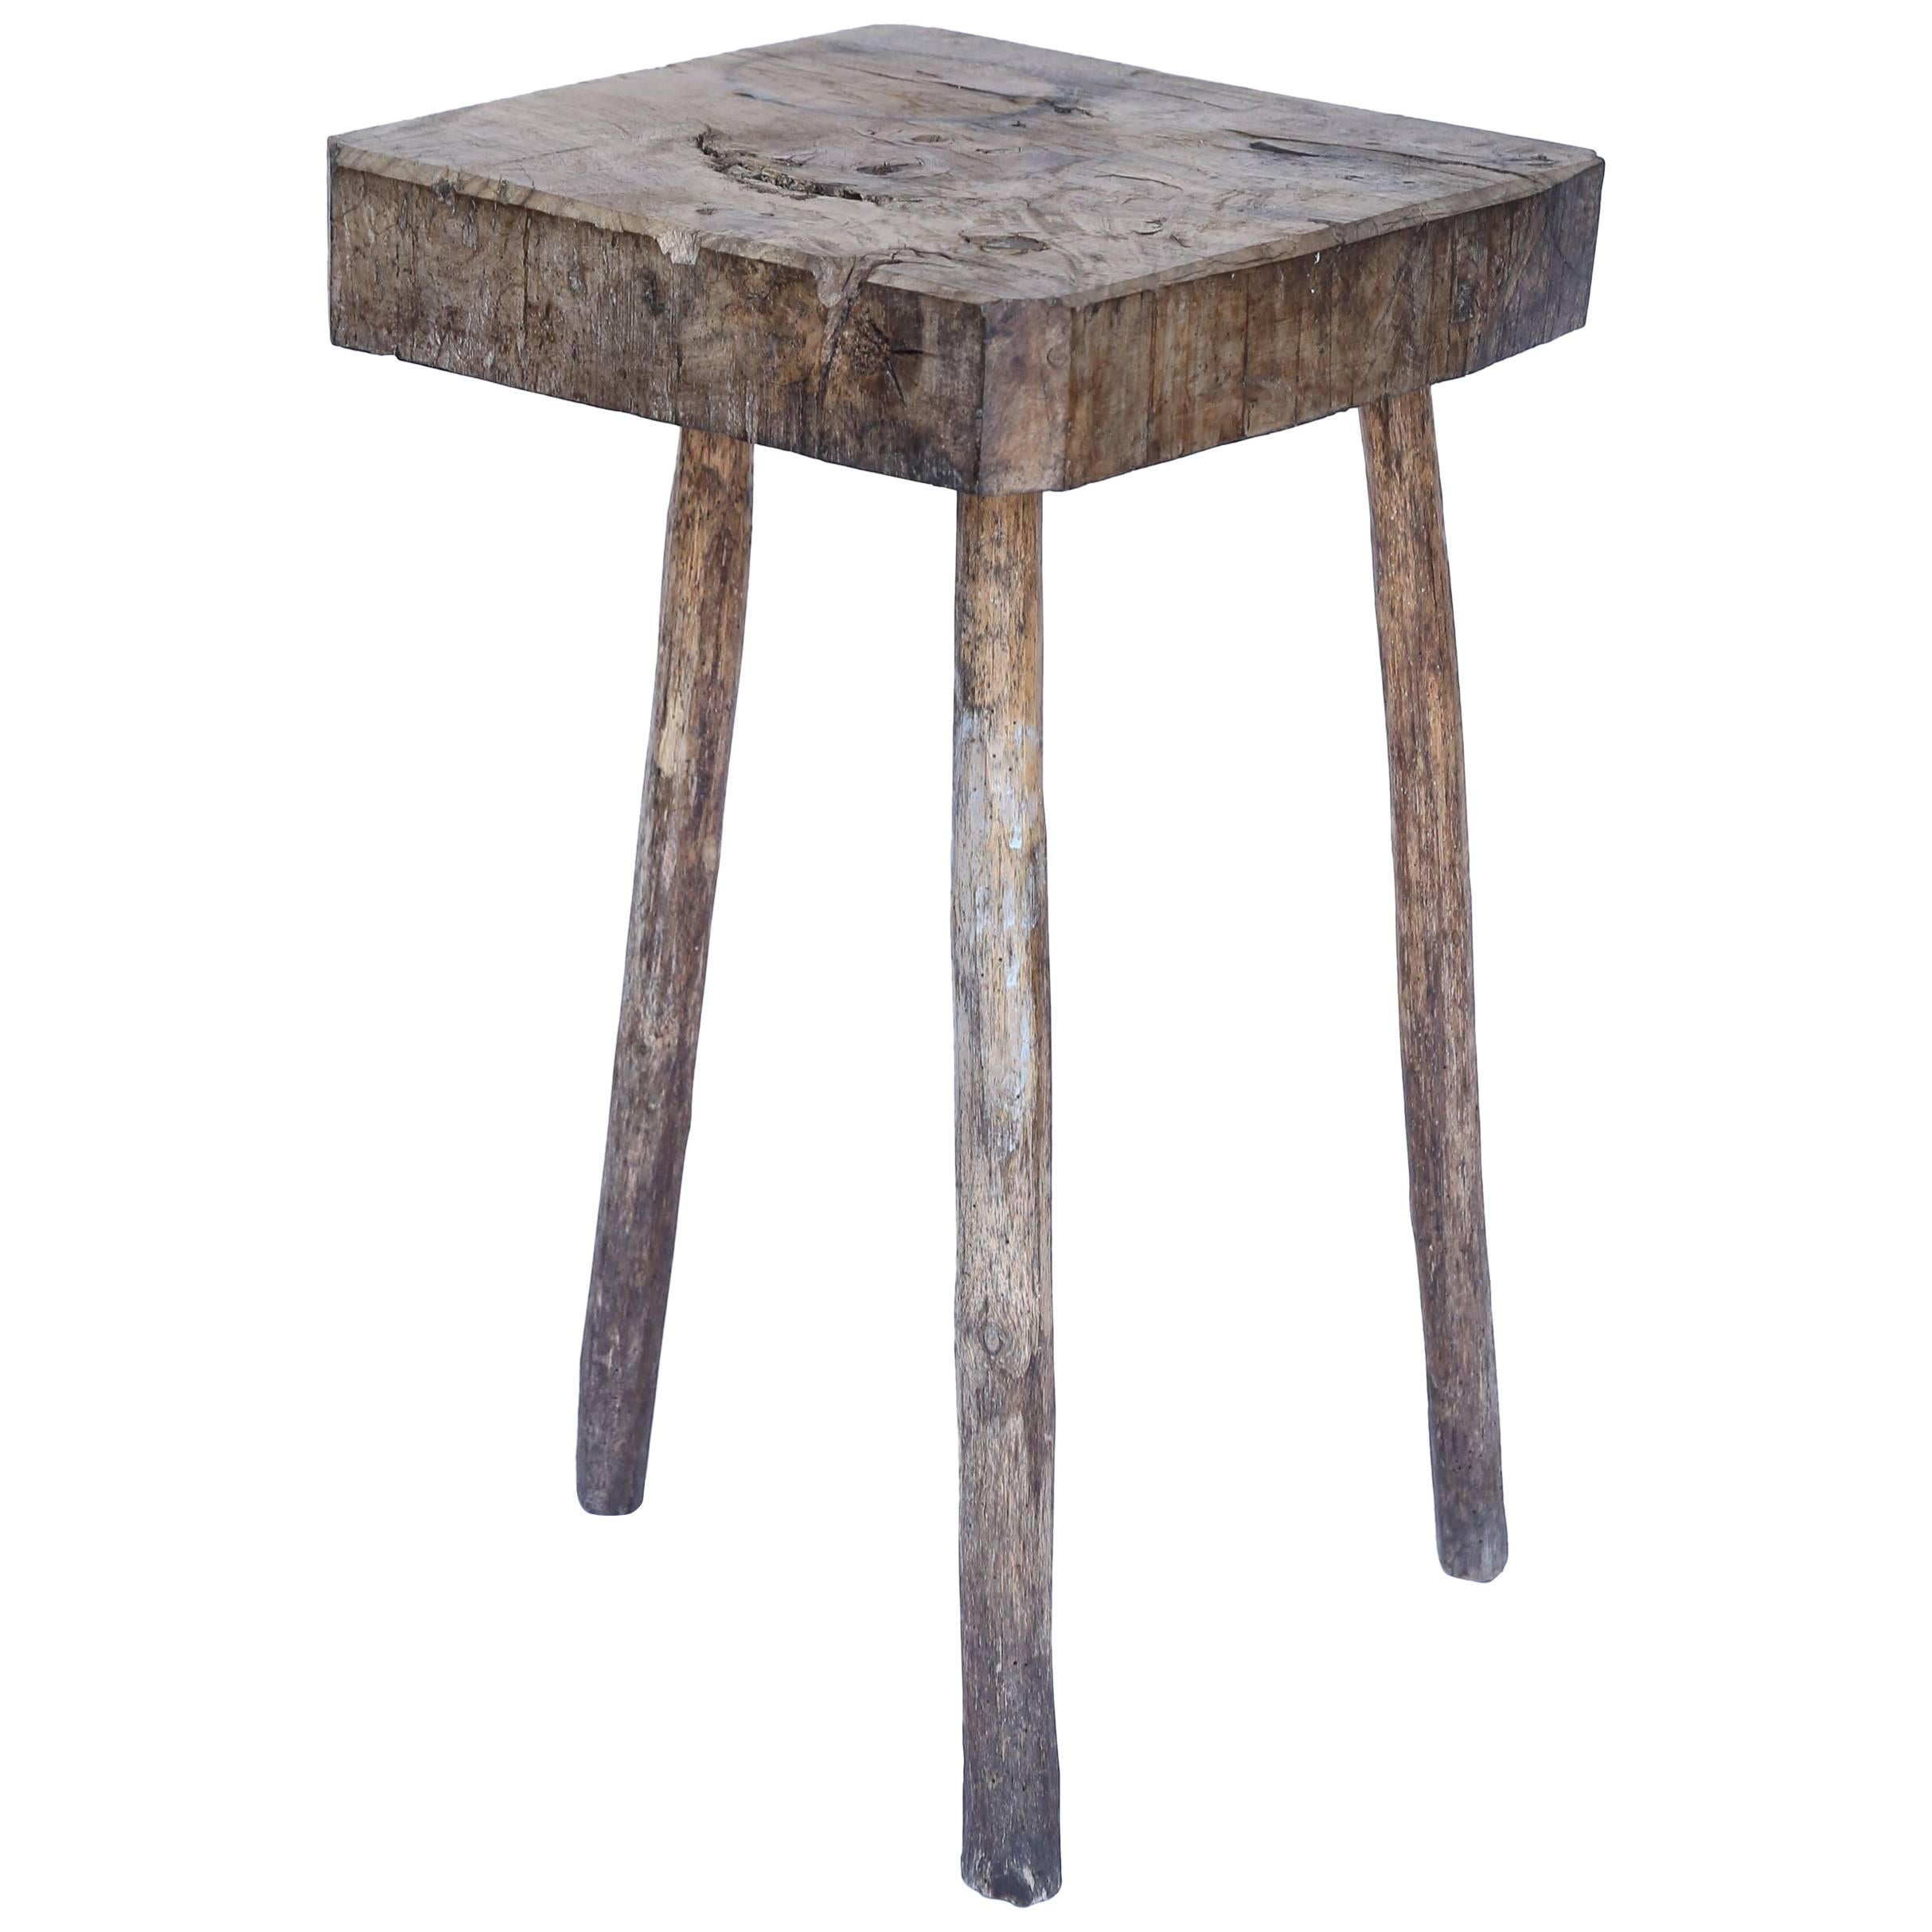 Rustic Three-Legged Table from France